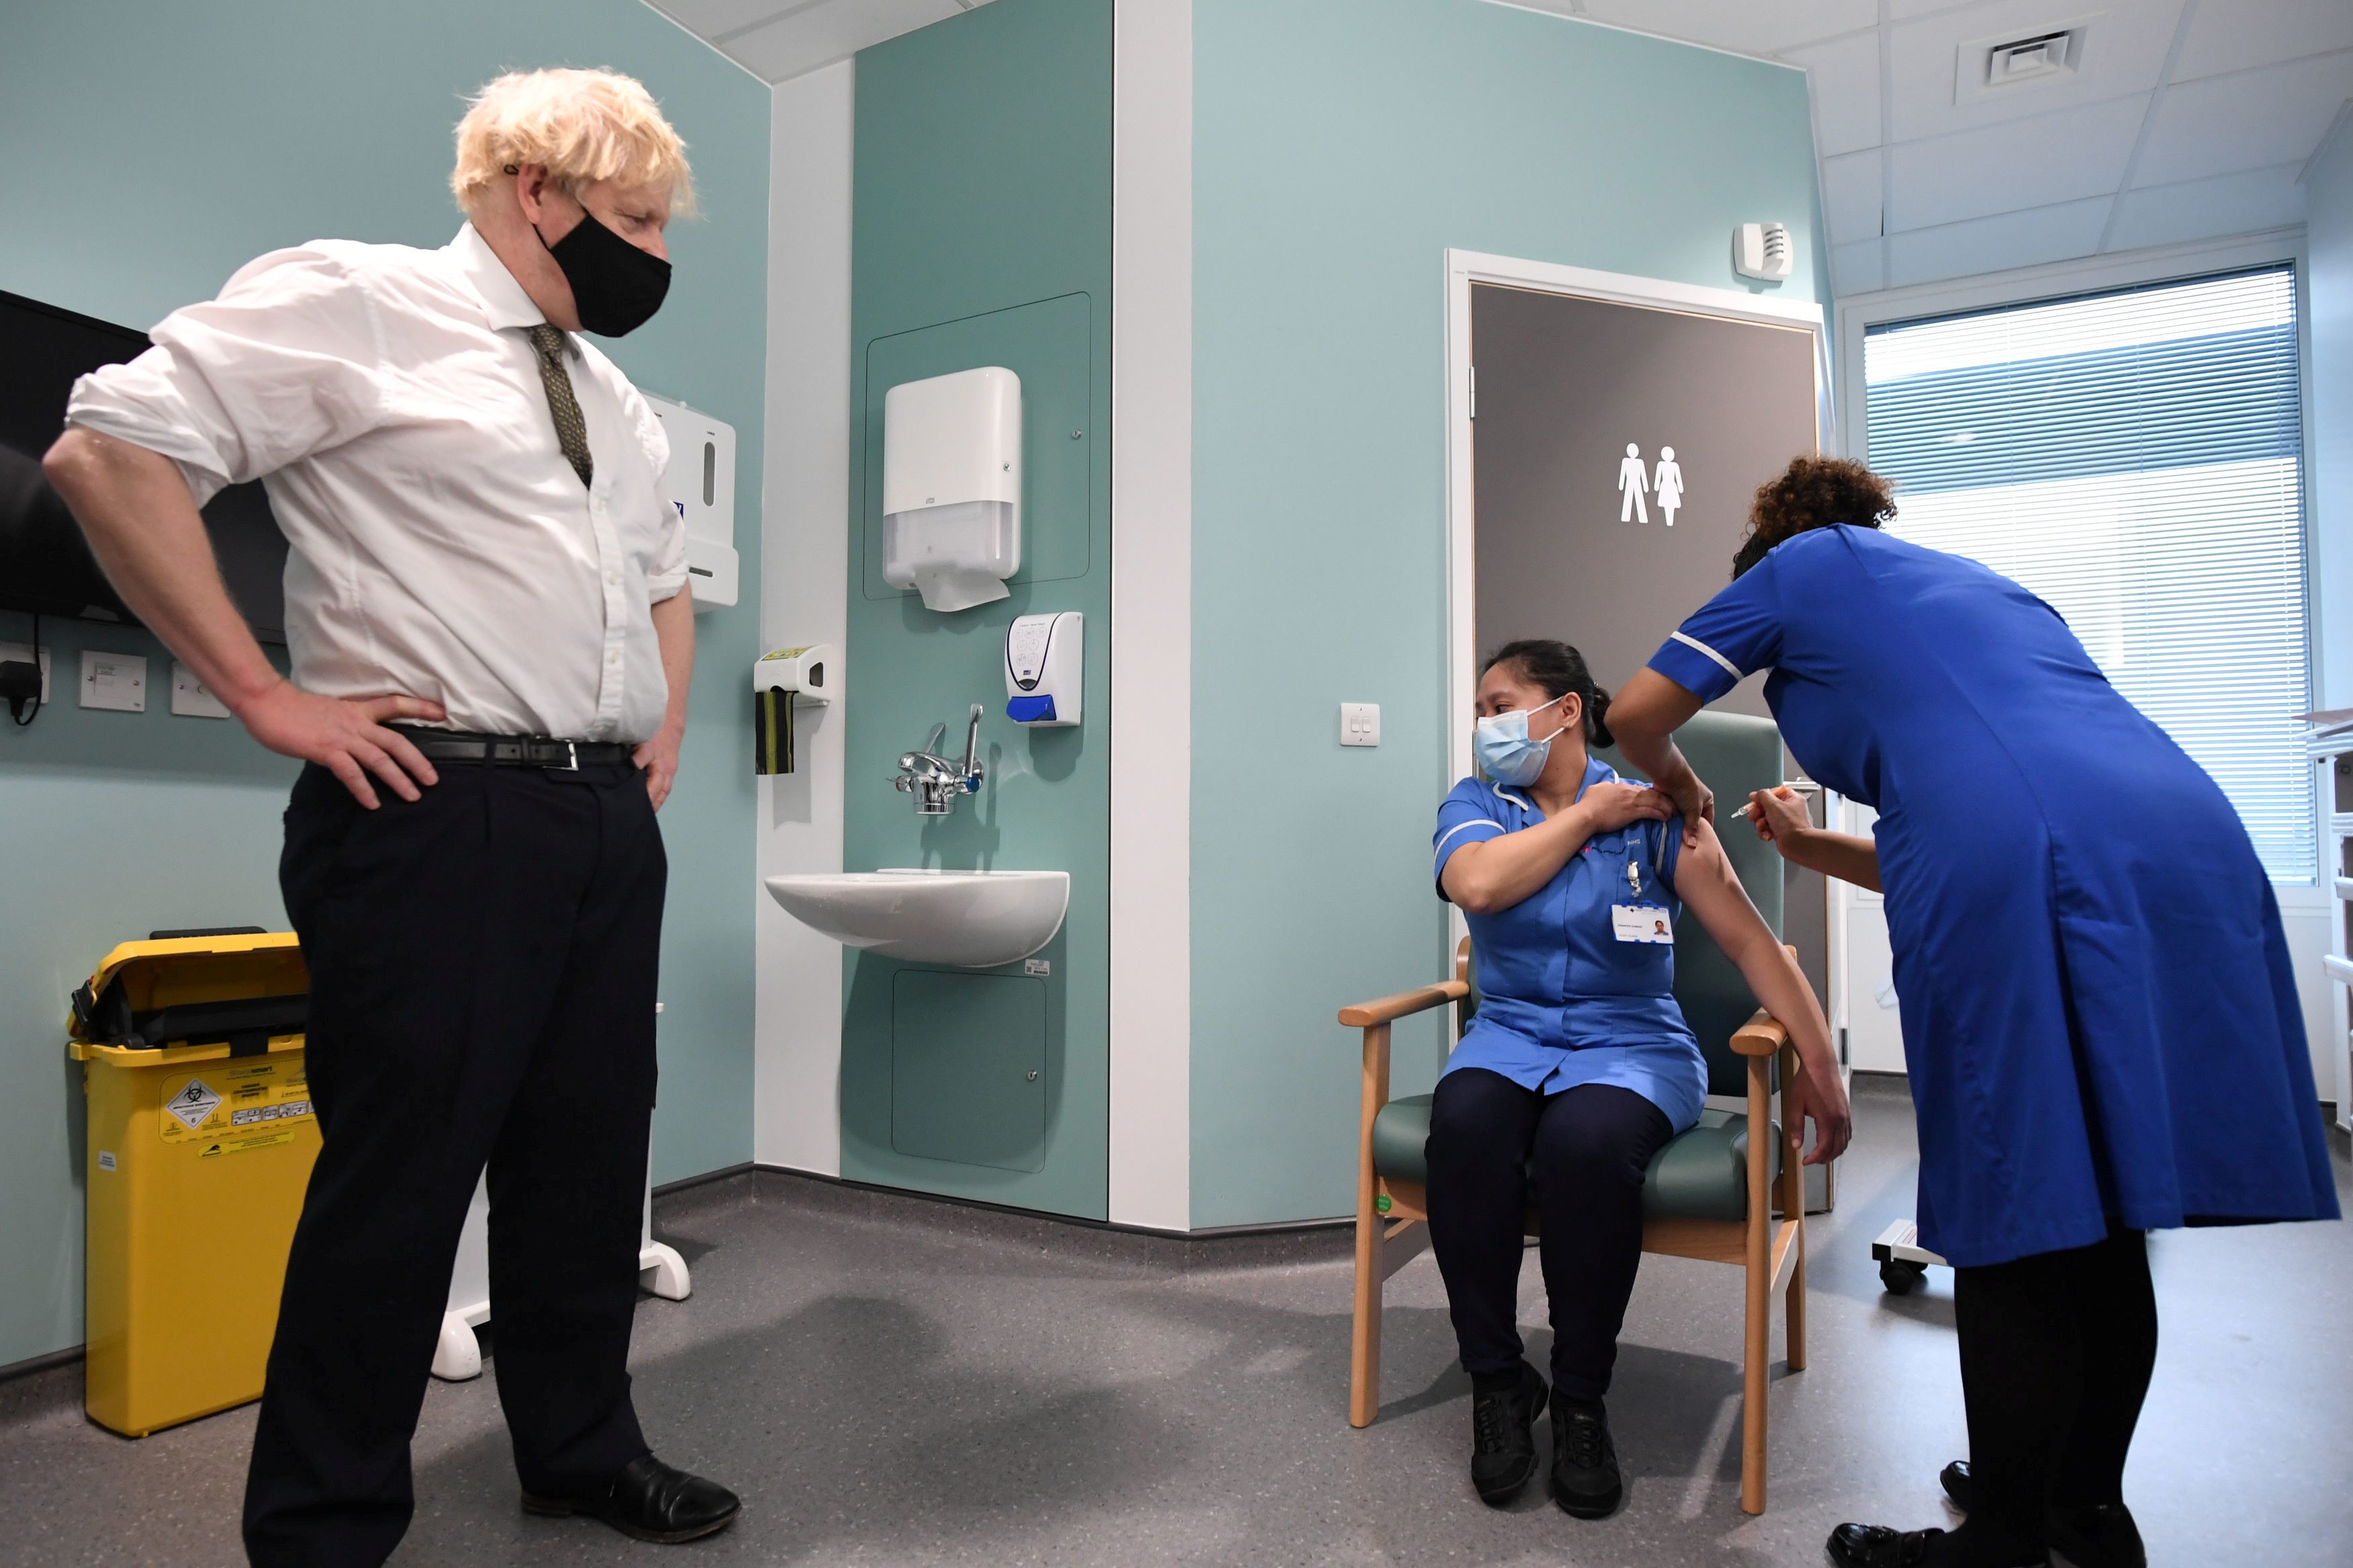 More than 1.3 million people vaccinated against COVID-19 in UK, says Johnson